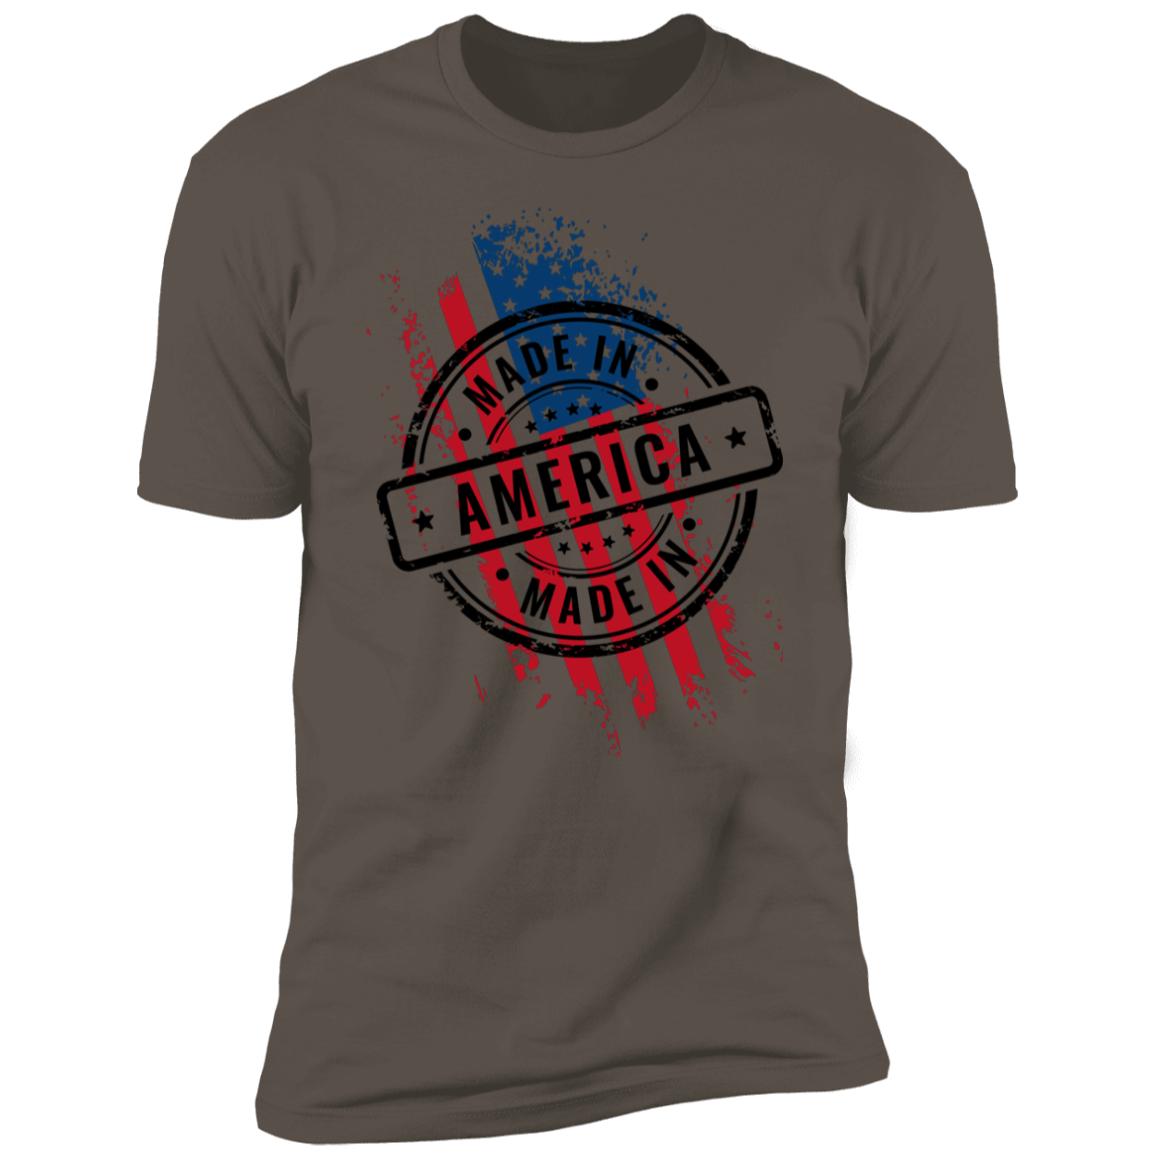 Made In America Short Sleeve T-Shirt